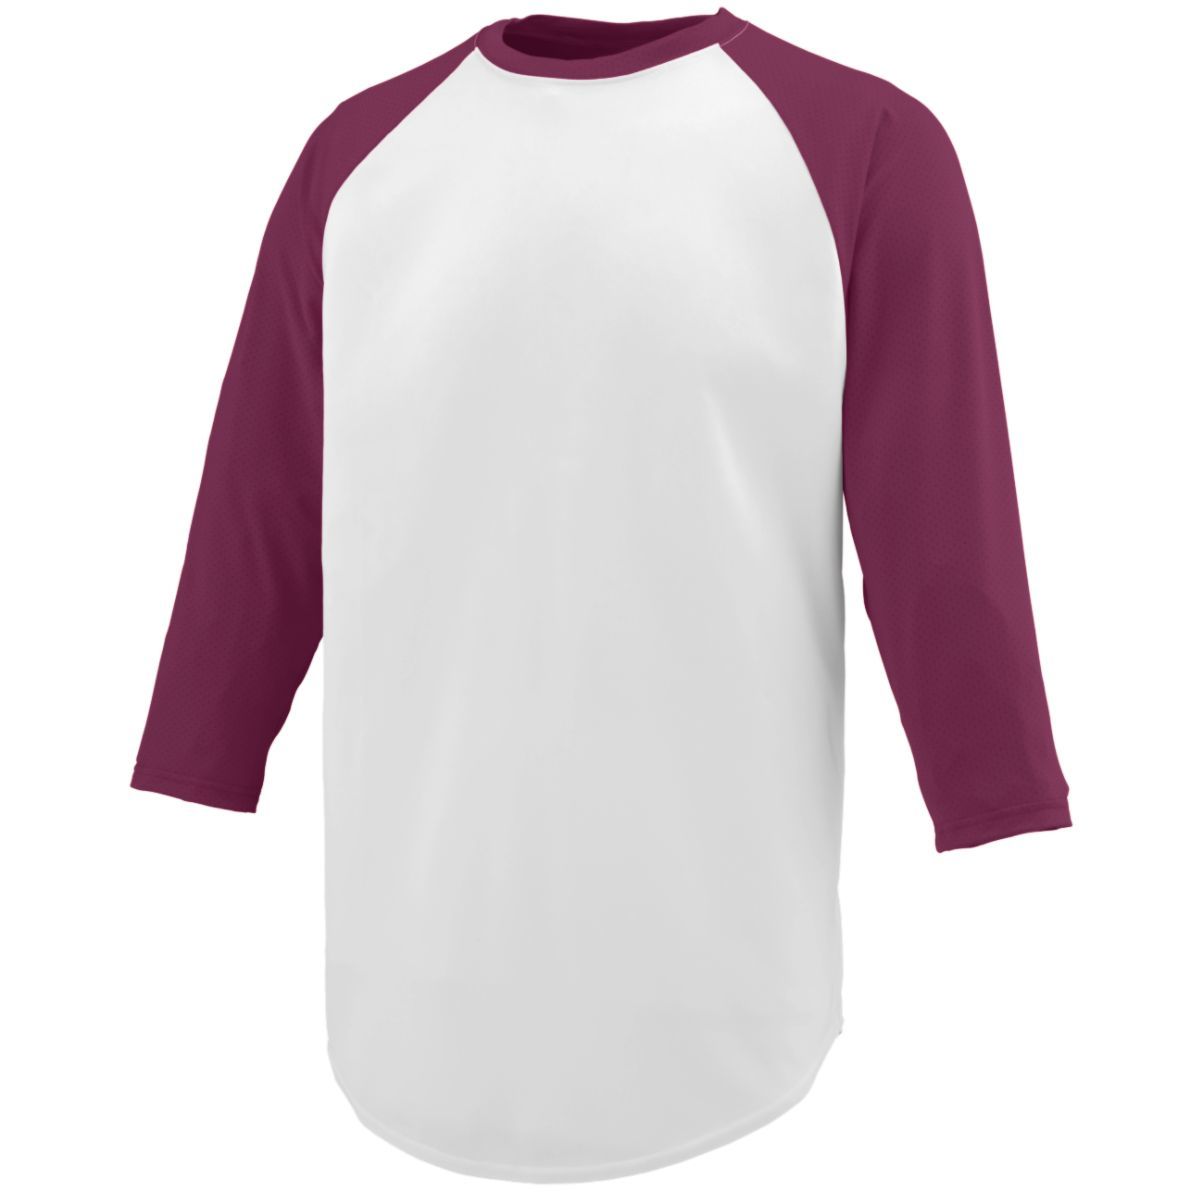 Augusta Sportswear Nova Jersey in White/Maroon  -Part of the Adult, Adult-Jersey, Augusta-Products, Baseball, Shirts, All-Sports, All-Sports-1 product lines at KanaleyCreations.com